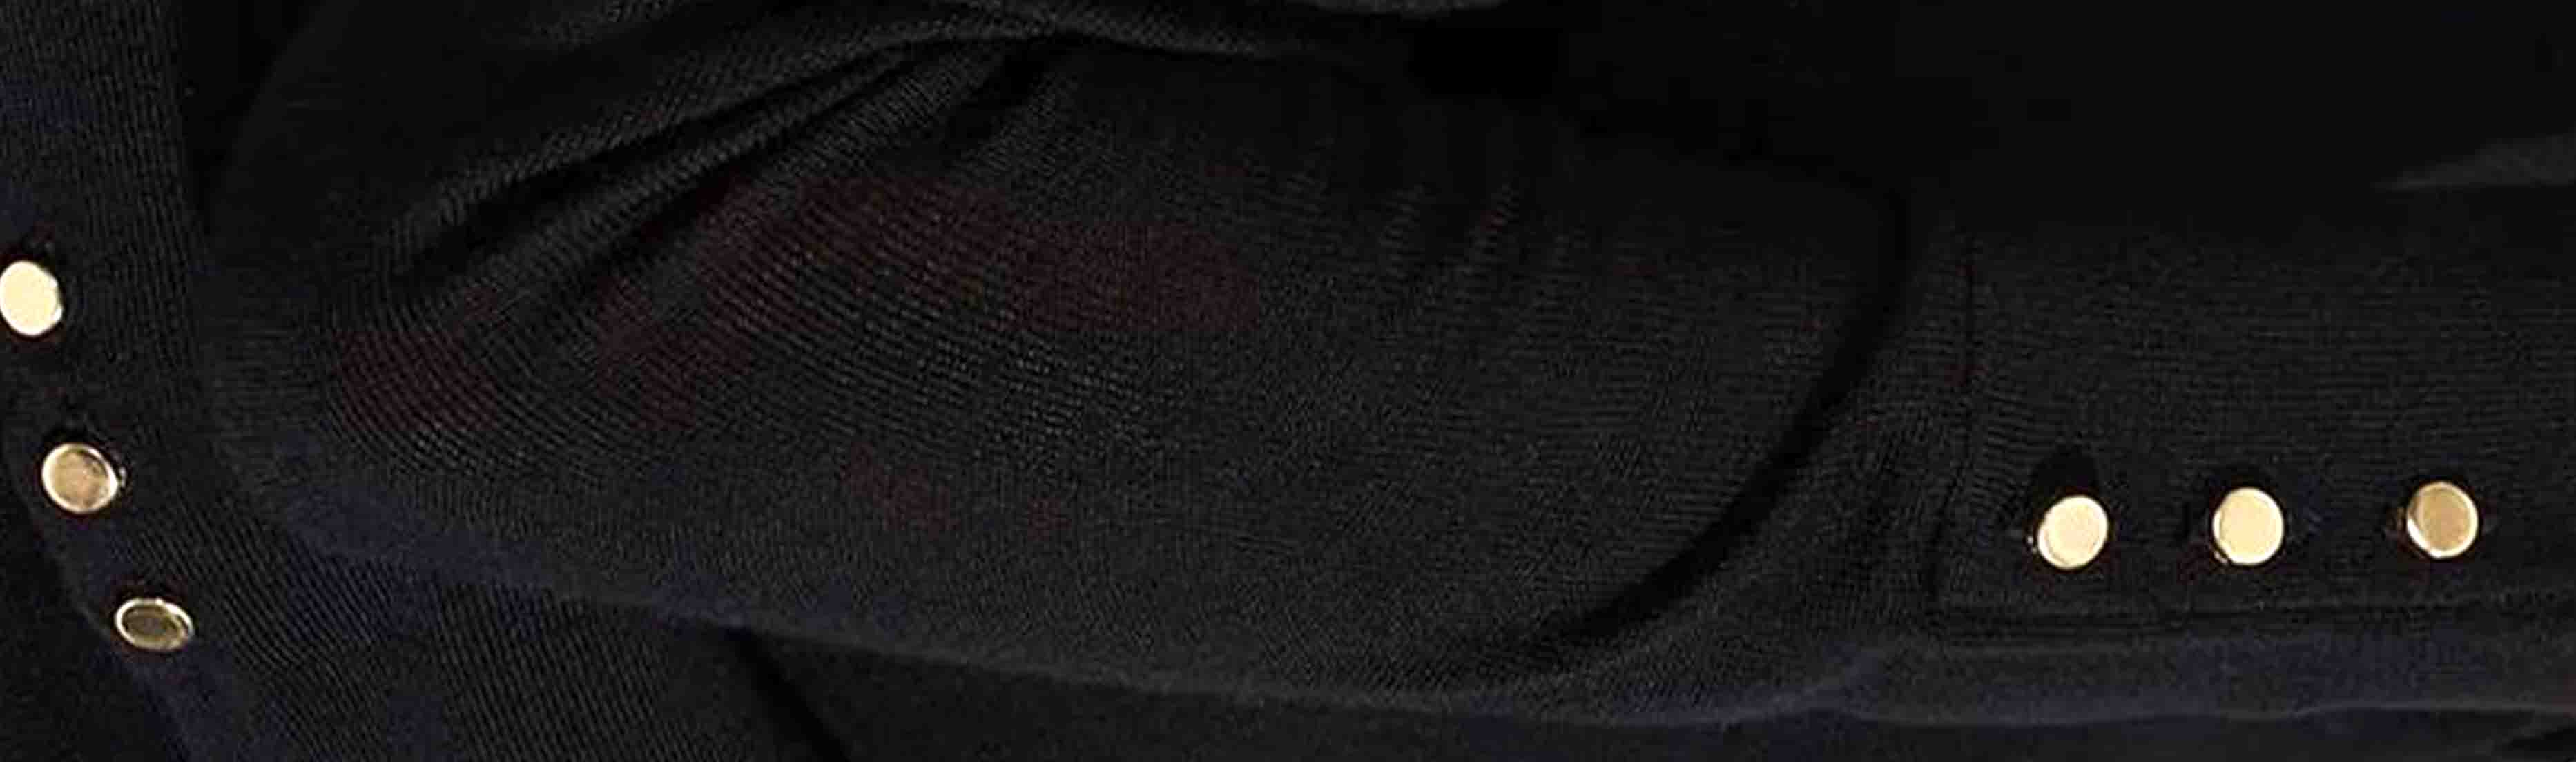 Close-up of the cuff detail on a Merino wool jumper.